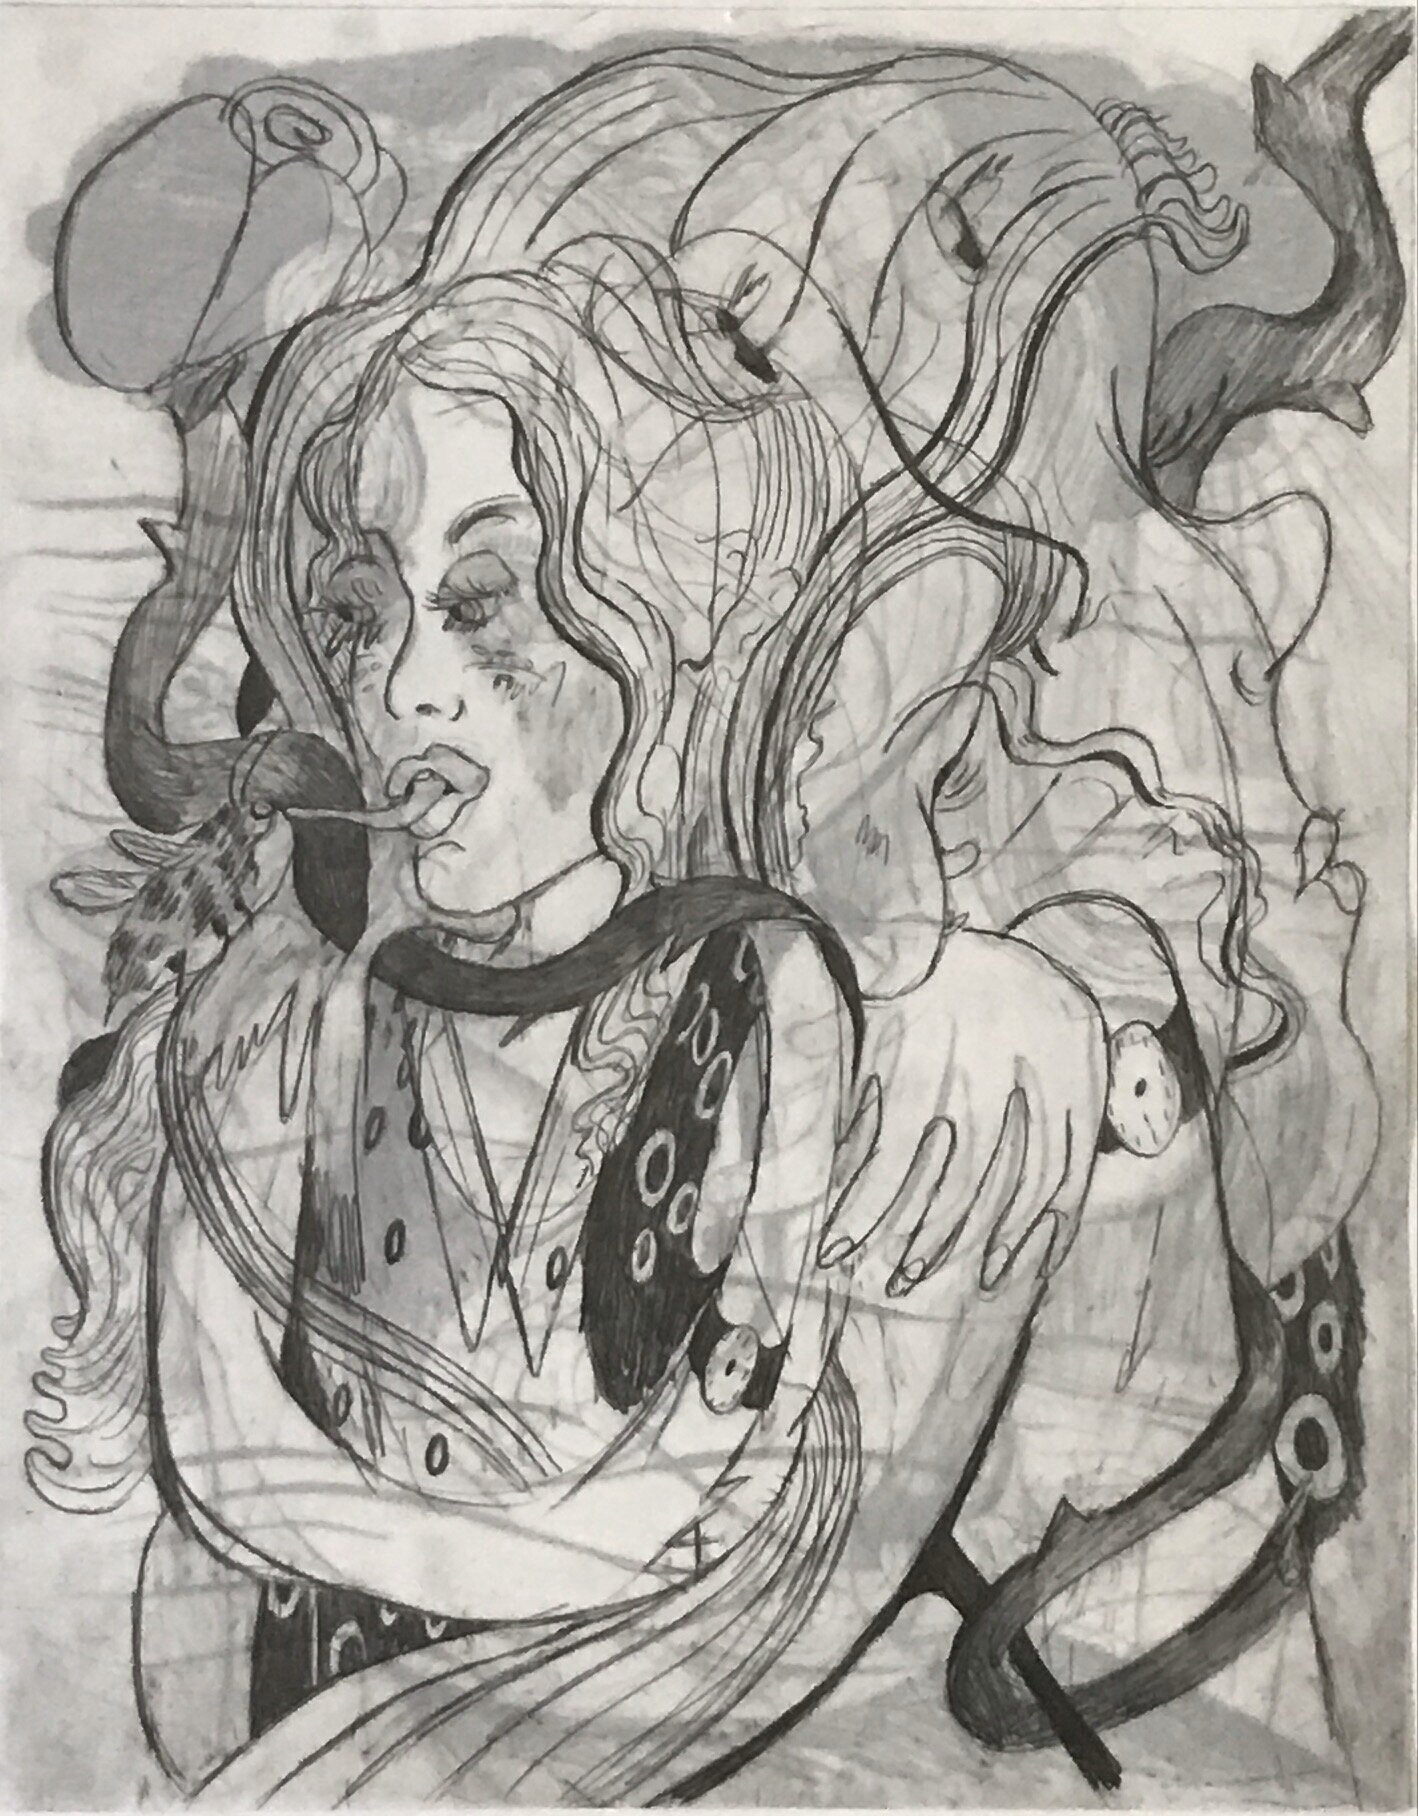   Honey time (nostalgique) ,  2020, graphite on translucent Yupo paper (one side of a back-and-front drawing), 11 x 14 inches 